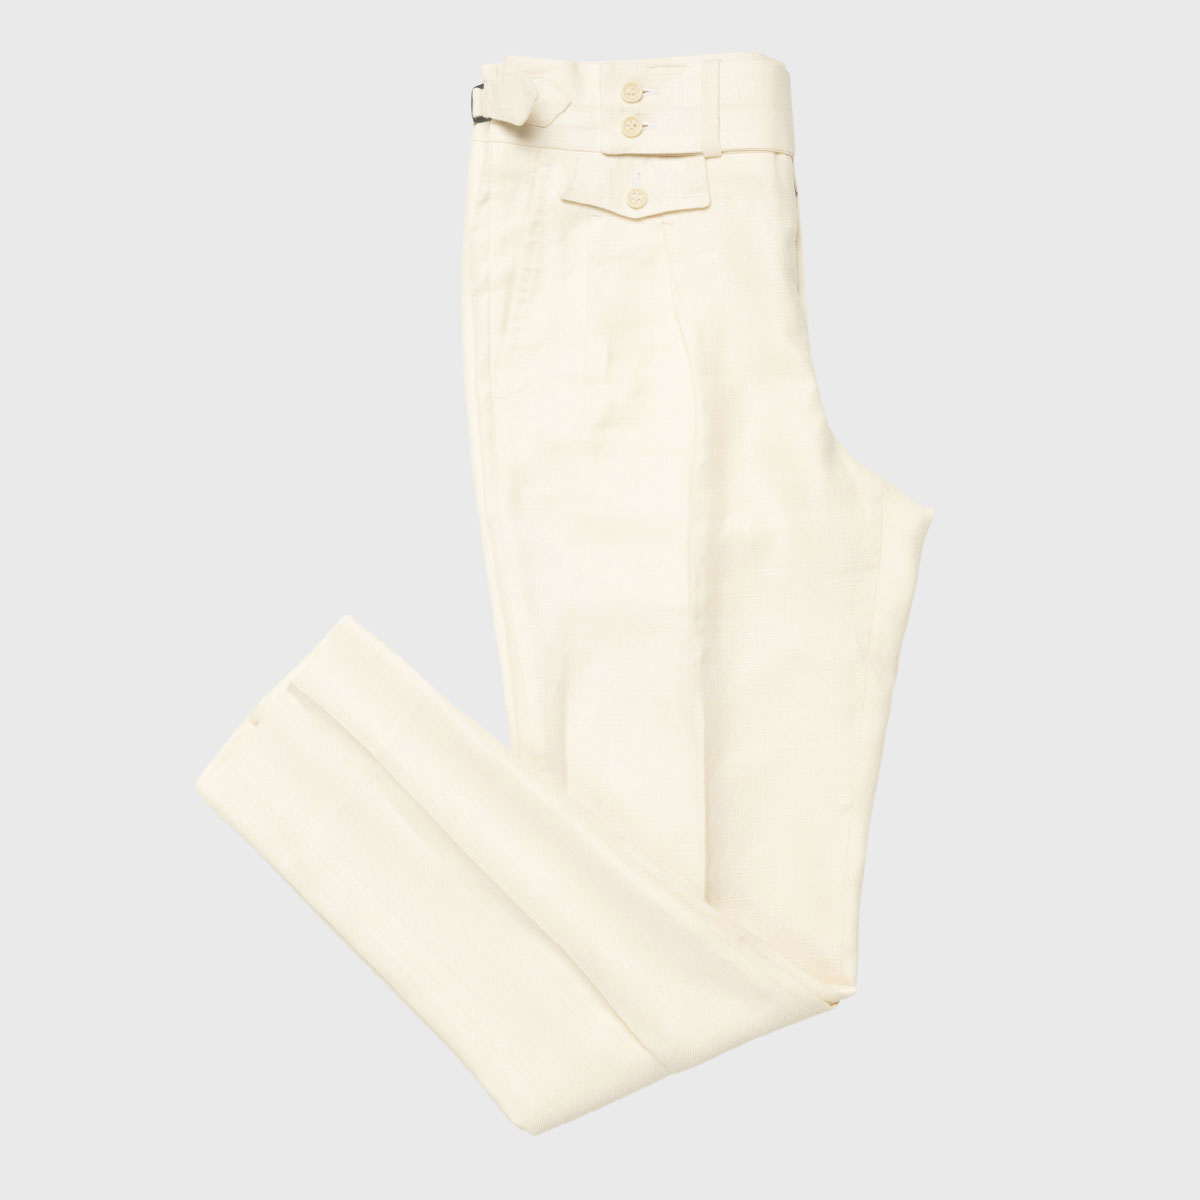 2 Pleats Trousers in Linen and Super 120’s Wool in Cream Sartoria Lavore on sale 2022